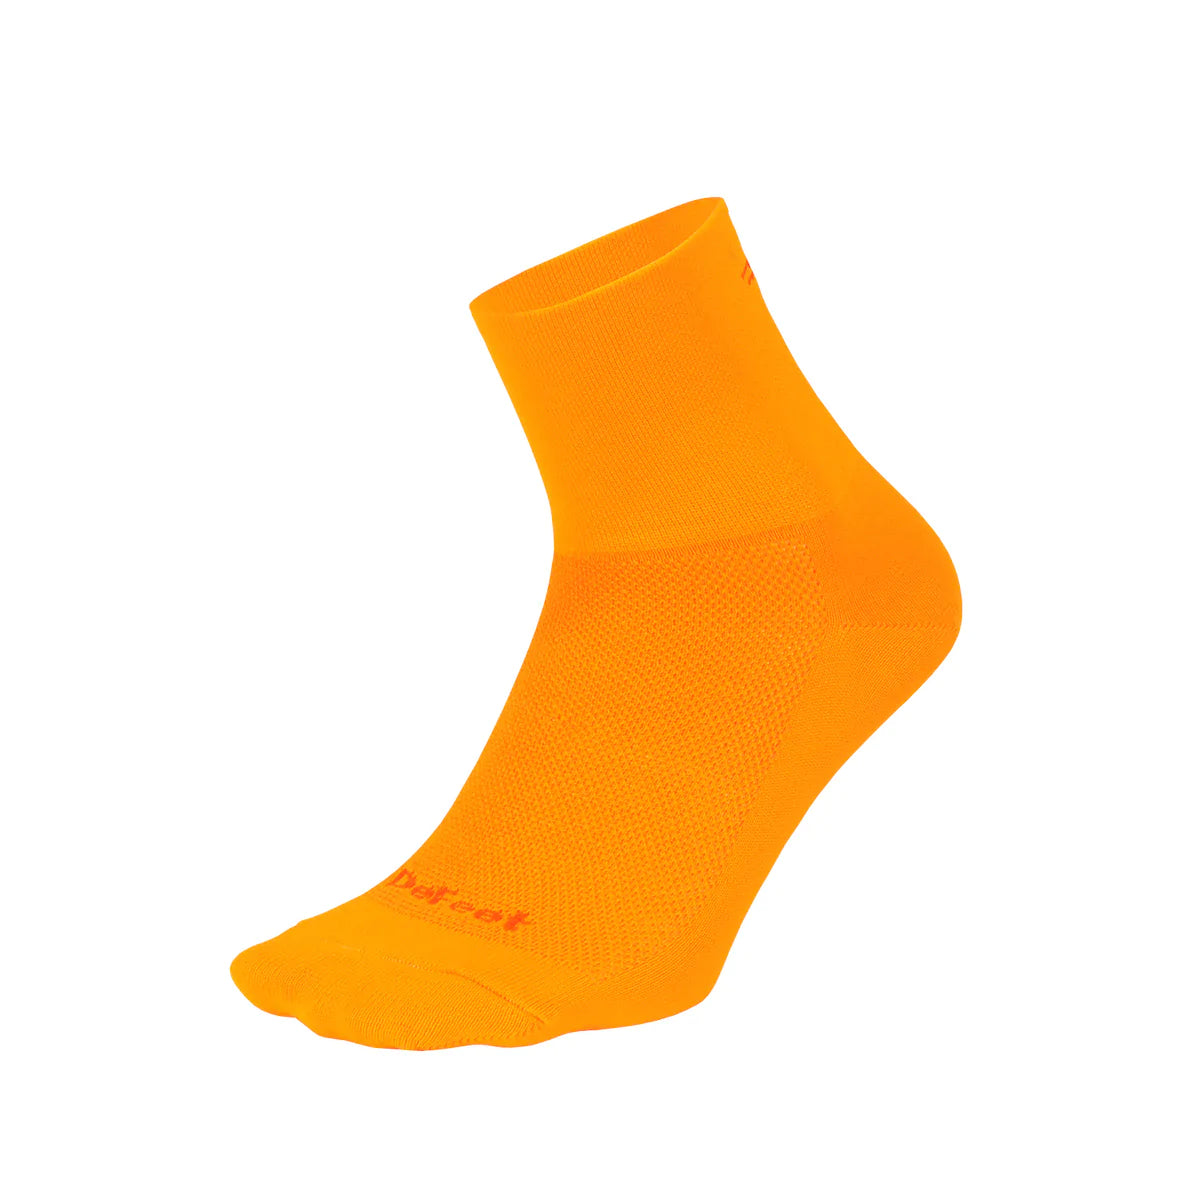 Aireator 3" cuff cycling sock in orange with small tonal orange d-logo on back of cuff